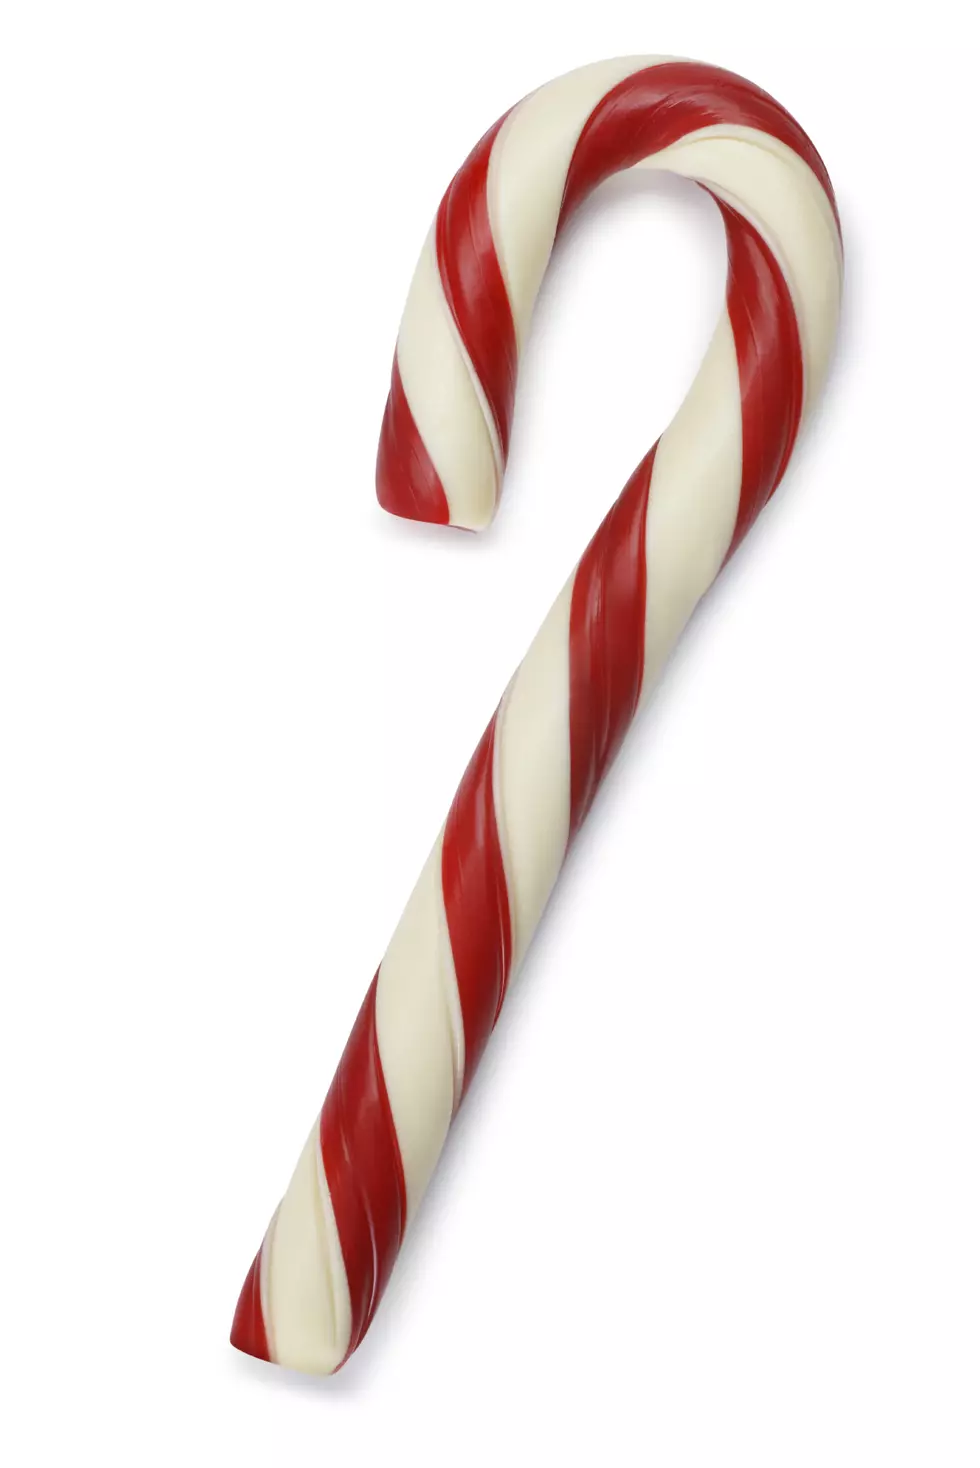 A “Big” Yes or No to Candy Canes